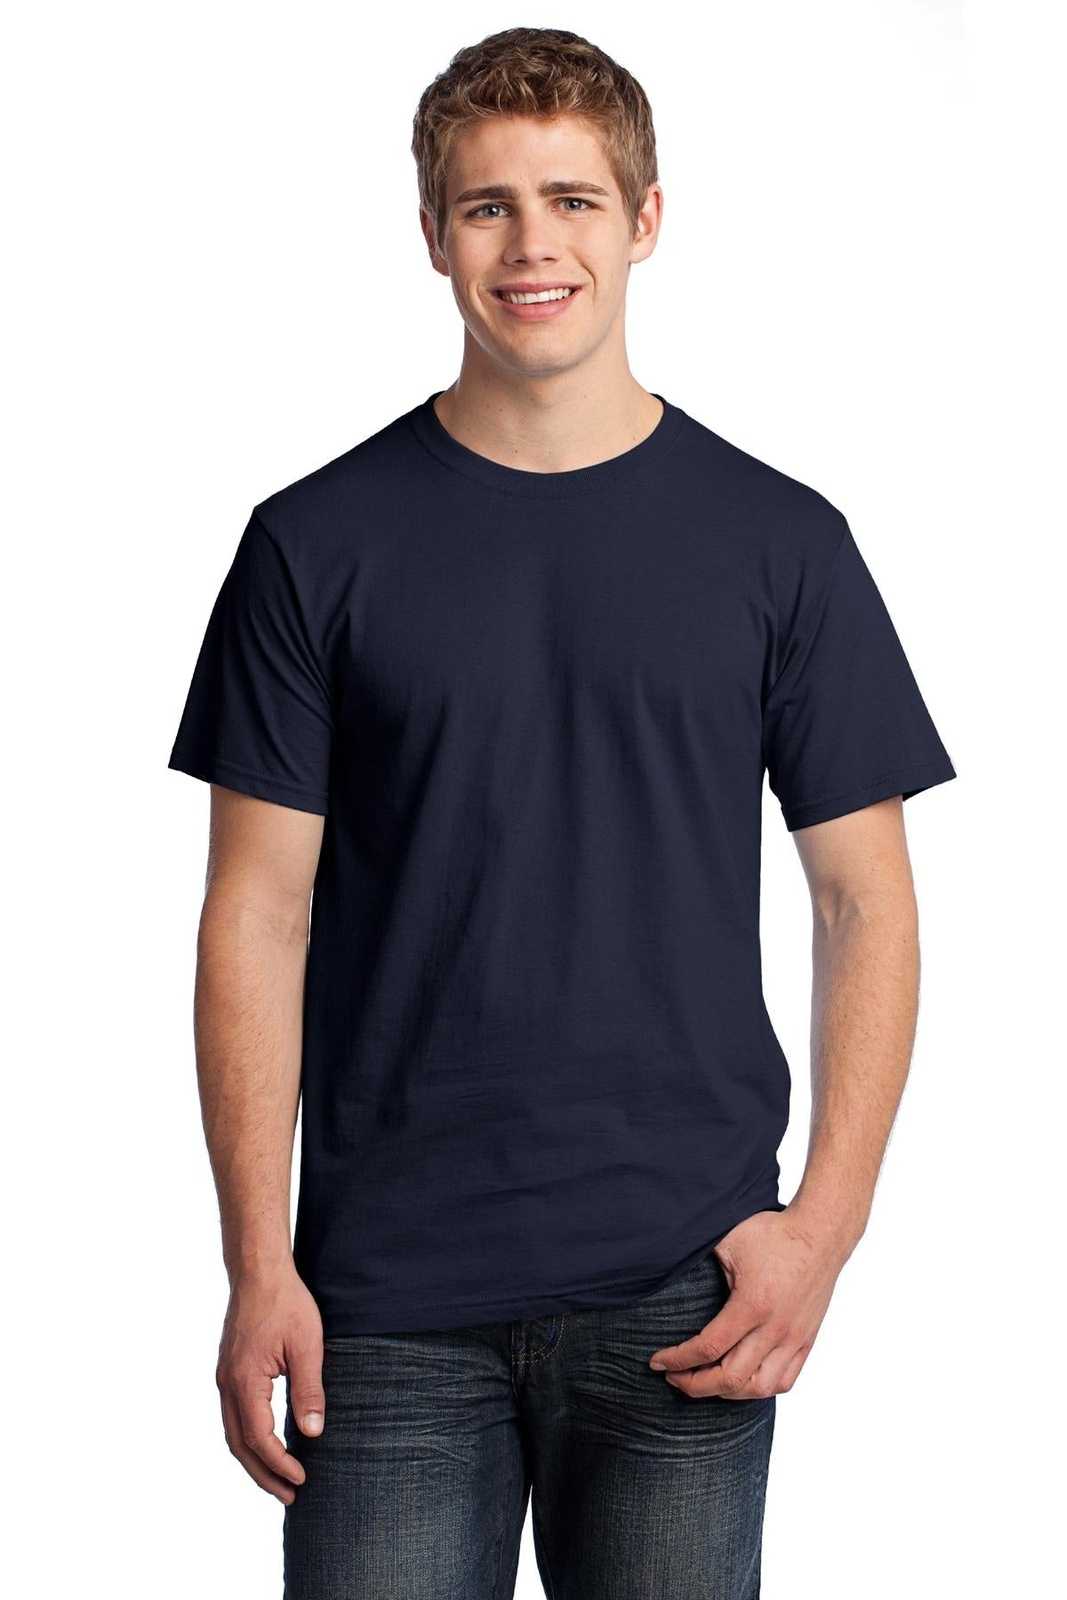 Fruit of the Loom 3930 HD Cotton 100% Cotton T-Shirt - Navy